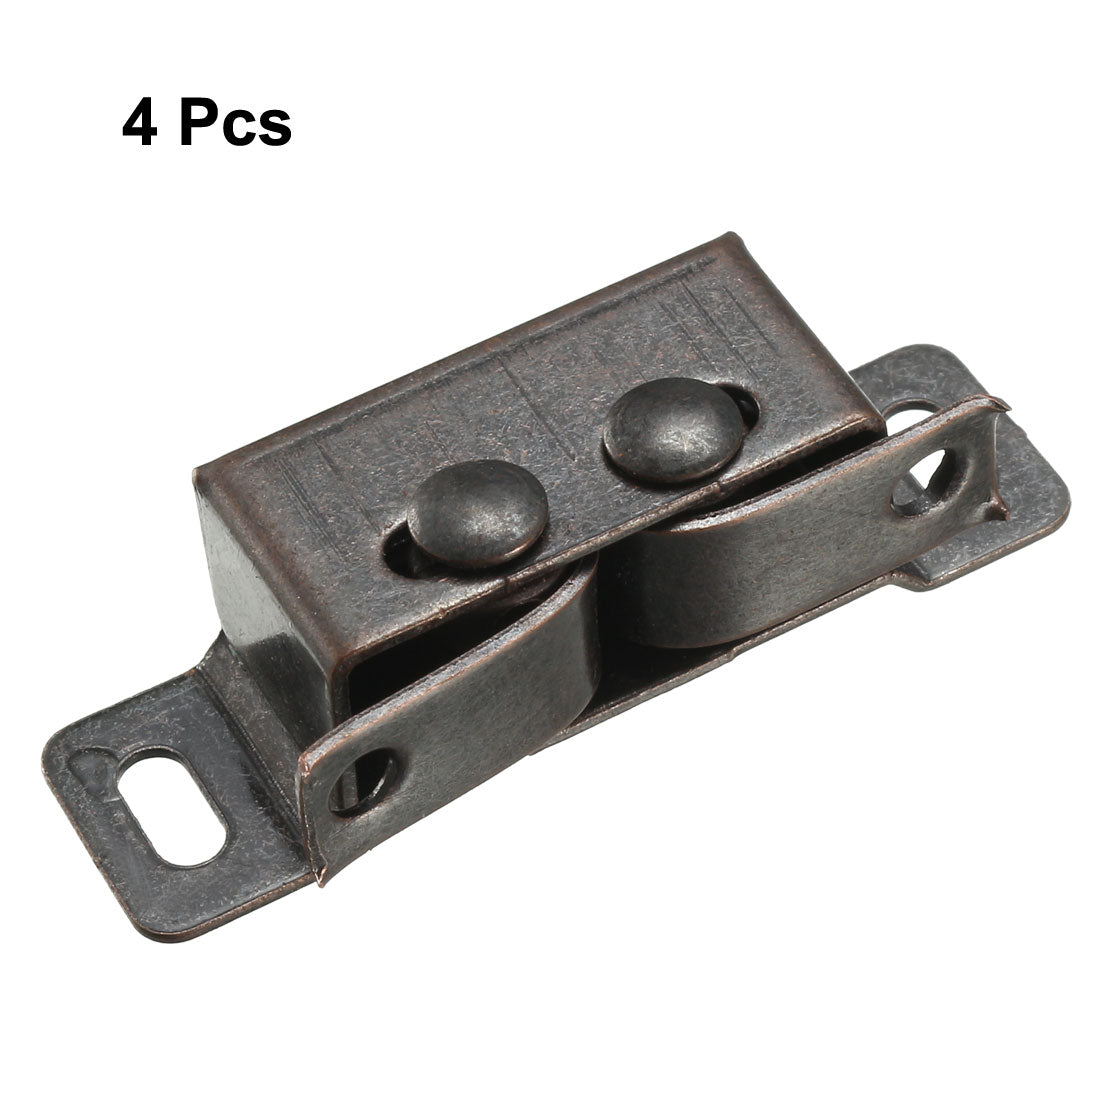 uxcell Uxcell Retro Wardrobe Door Iron Double Ball Roller Catch Latch, Copper Tone 4pcs